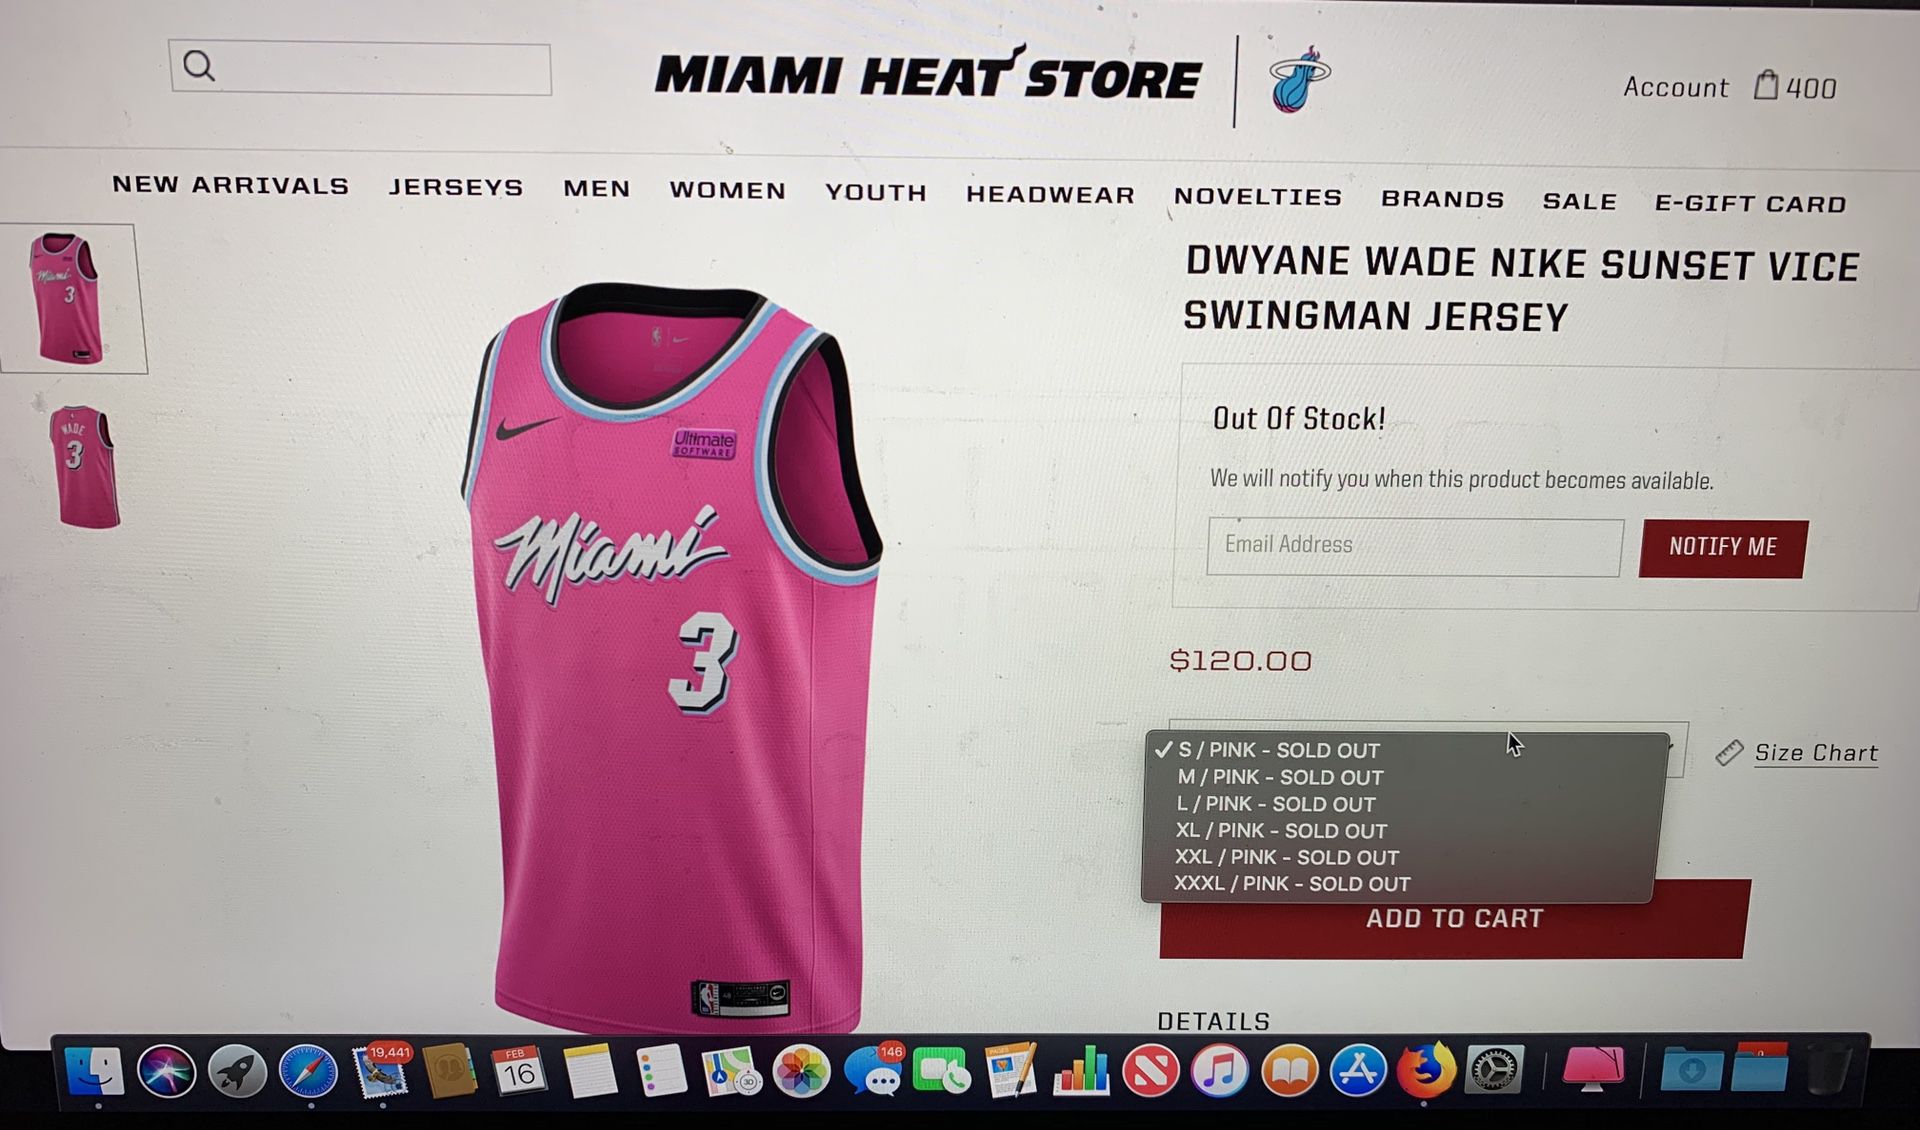 JOTD brought out the “heat” for game 4. D wade pink vice earned